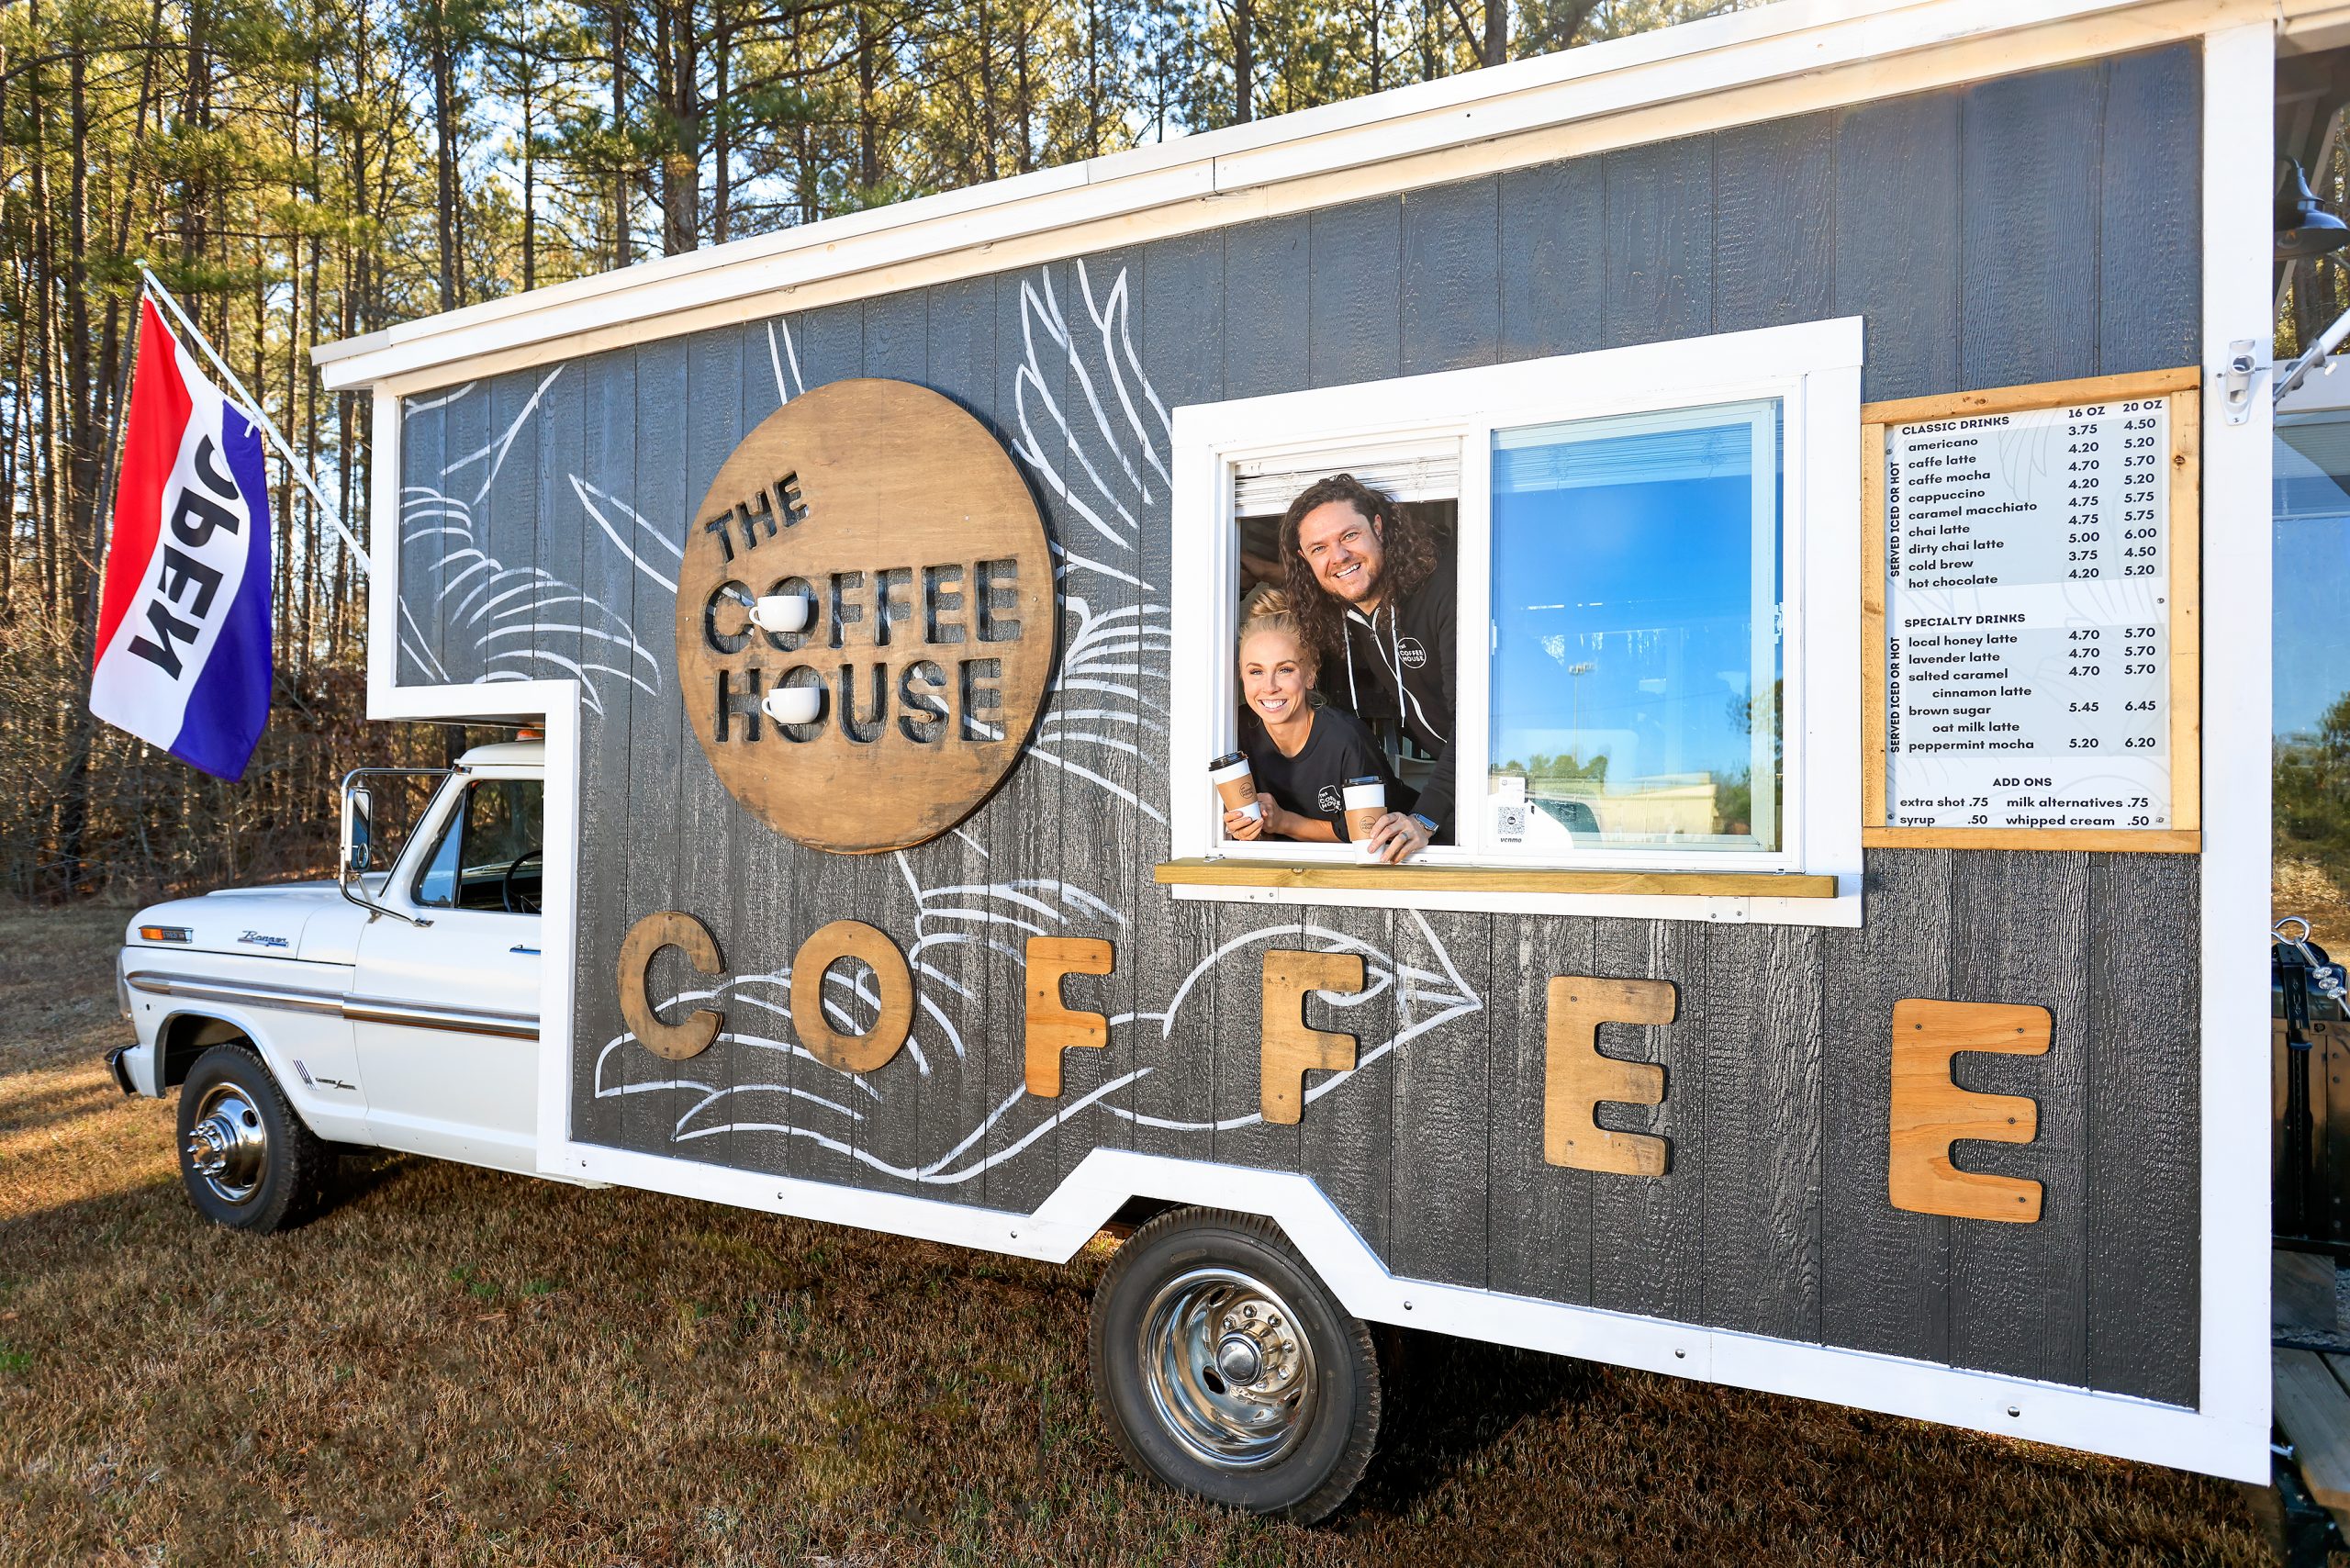 When Kristen and Philip sold their California home, they drove east to South Carolina in a tiny house built on the back of a flatbed truck. The house, renovated by Philip, is now a thriving business. The Coffee House Truck is parked at Heritage Field Farms every weekday morning, giving the Oswalds opportunities to forge friendships and connect with the community. 